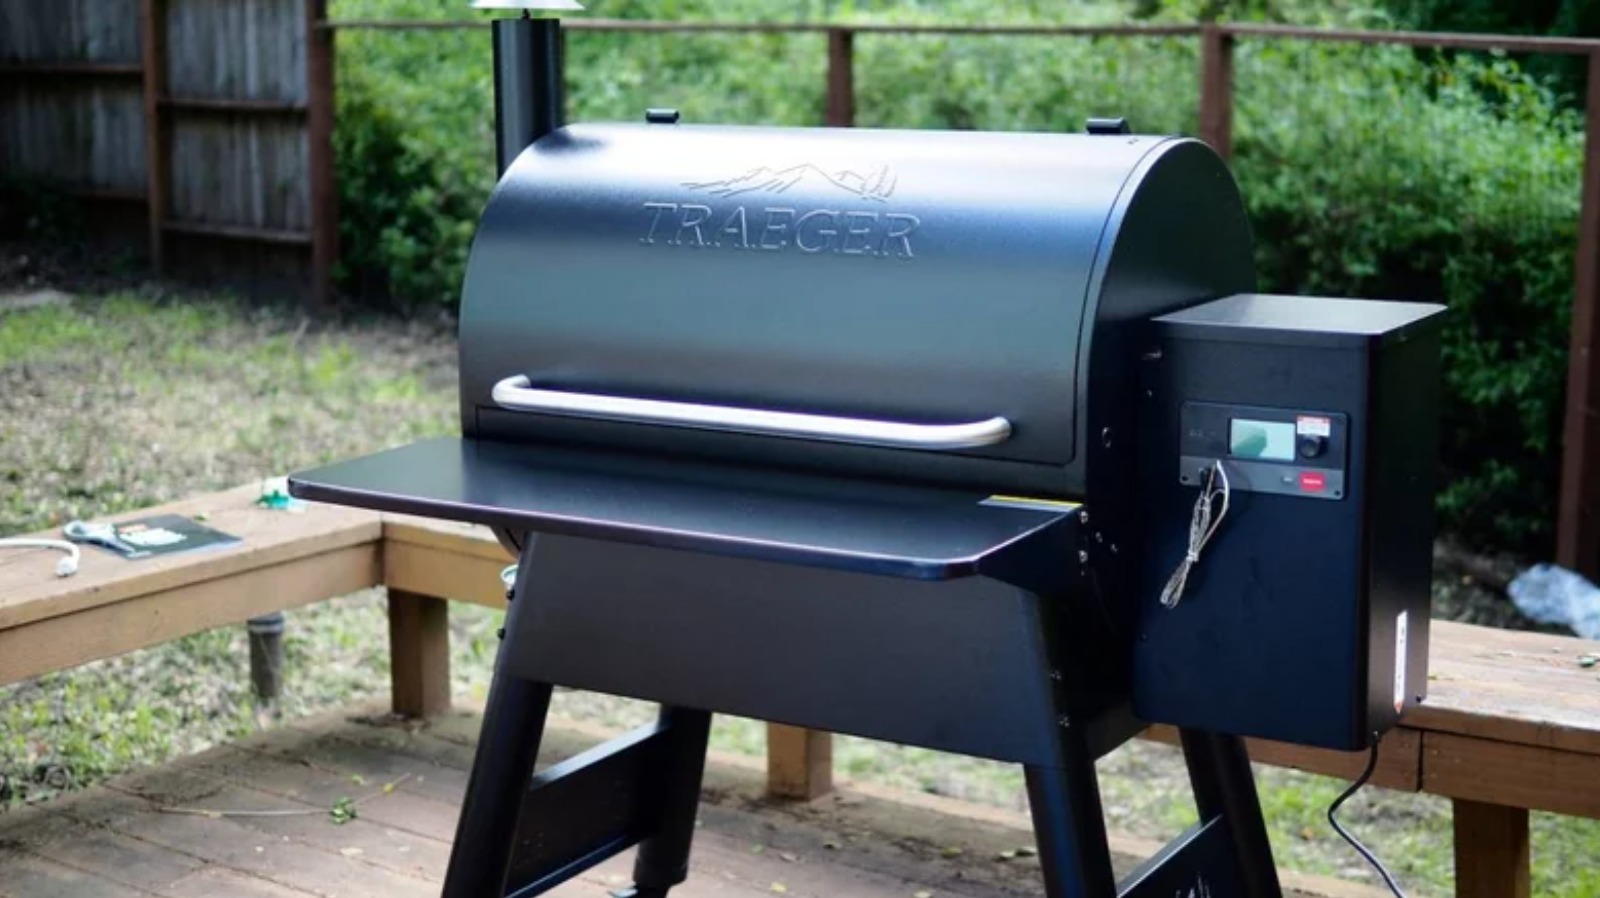 https://www.slashgear.com/img/gallery/traeger-pro-780-review-why-your-next-pellet-grill-needs-wifi/l-intro-1645827937.jpg